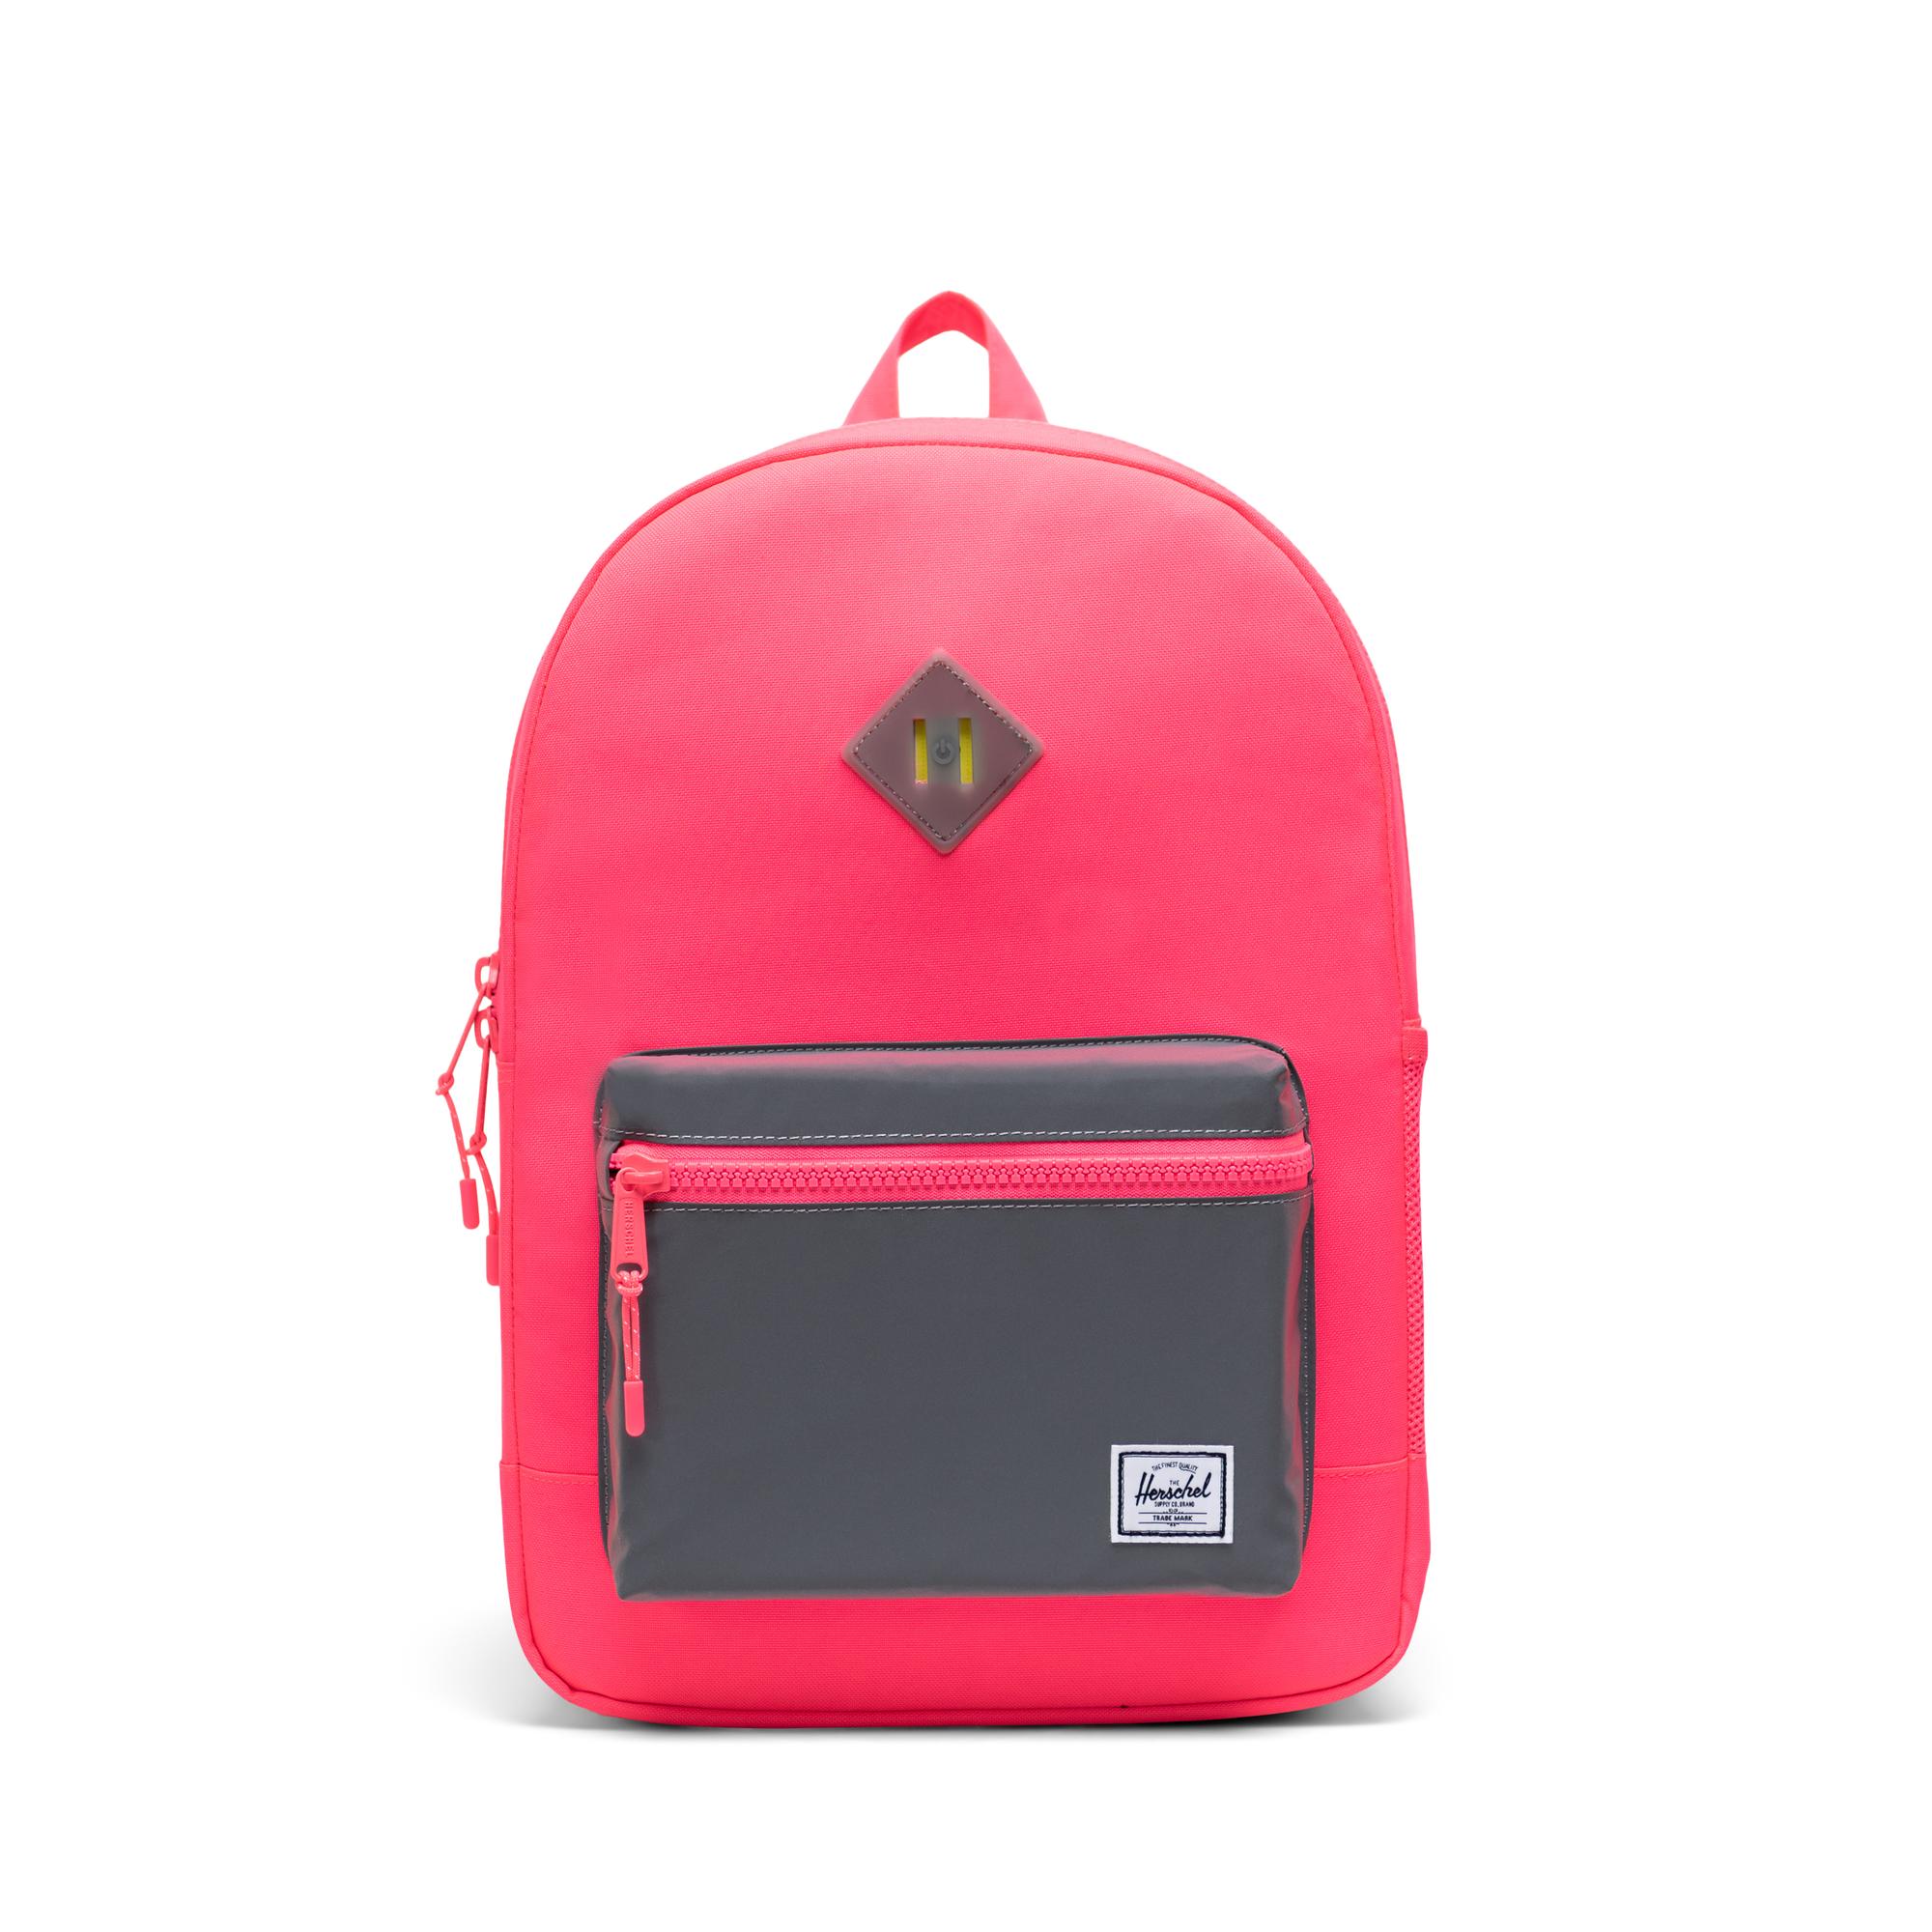 Heritage Backpack | Youth XL | Herschel Supply Company